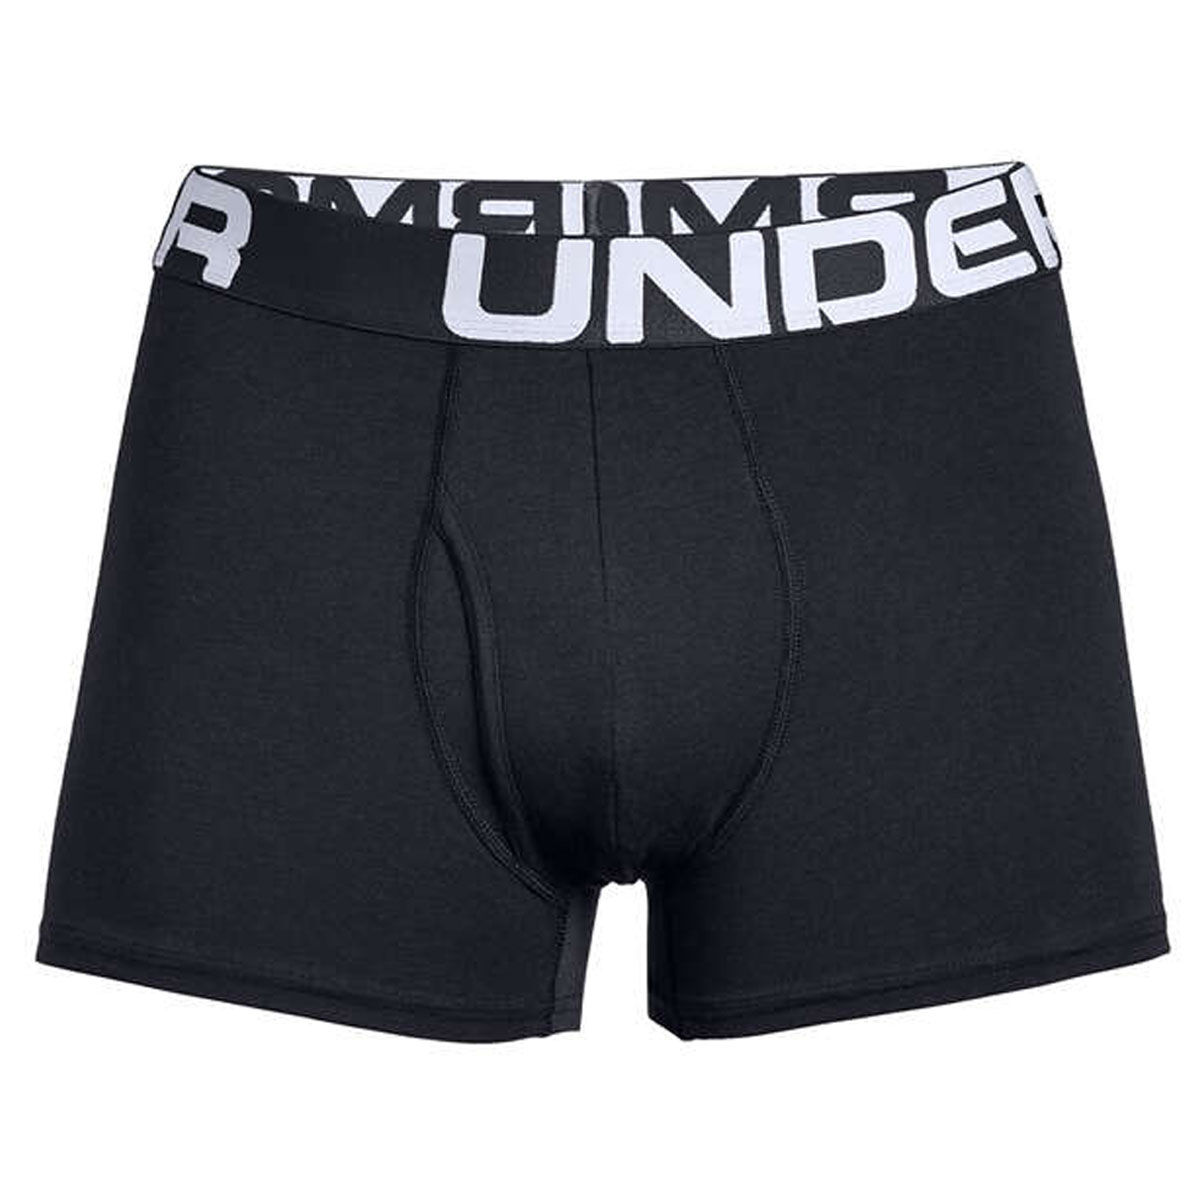 New Under Armour Boys Button Fly Boxers Underwear. 4 Colors To